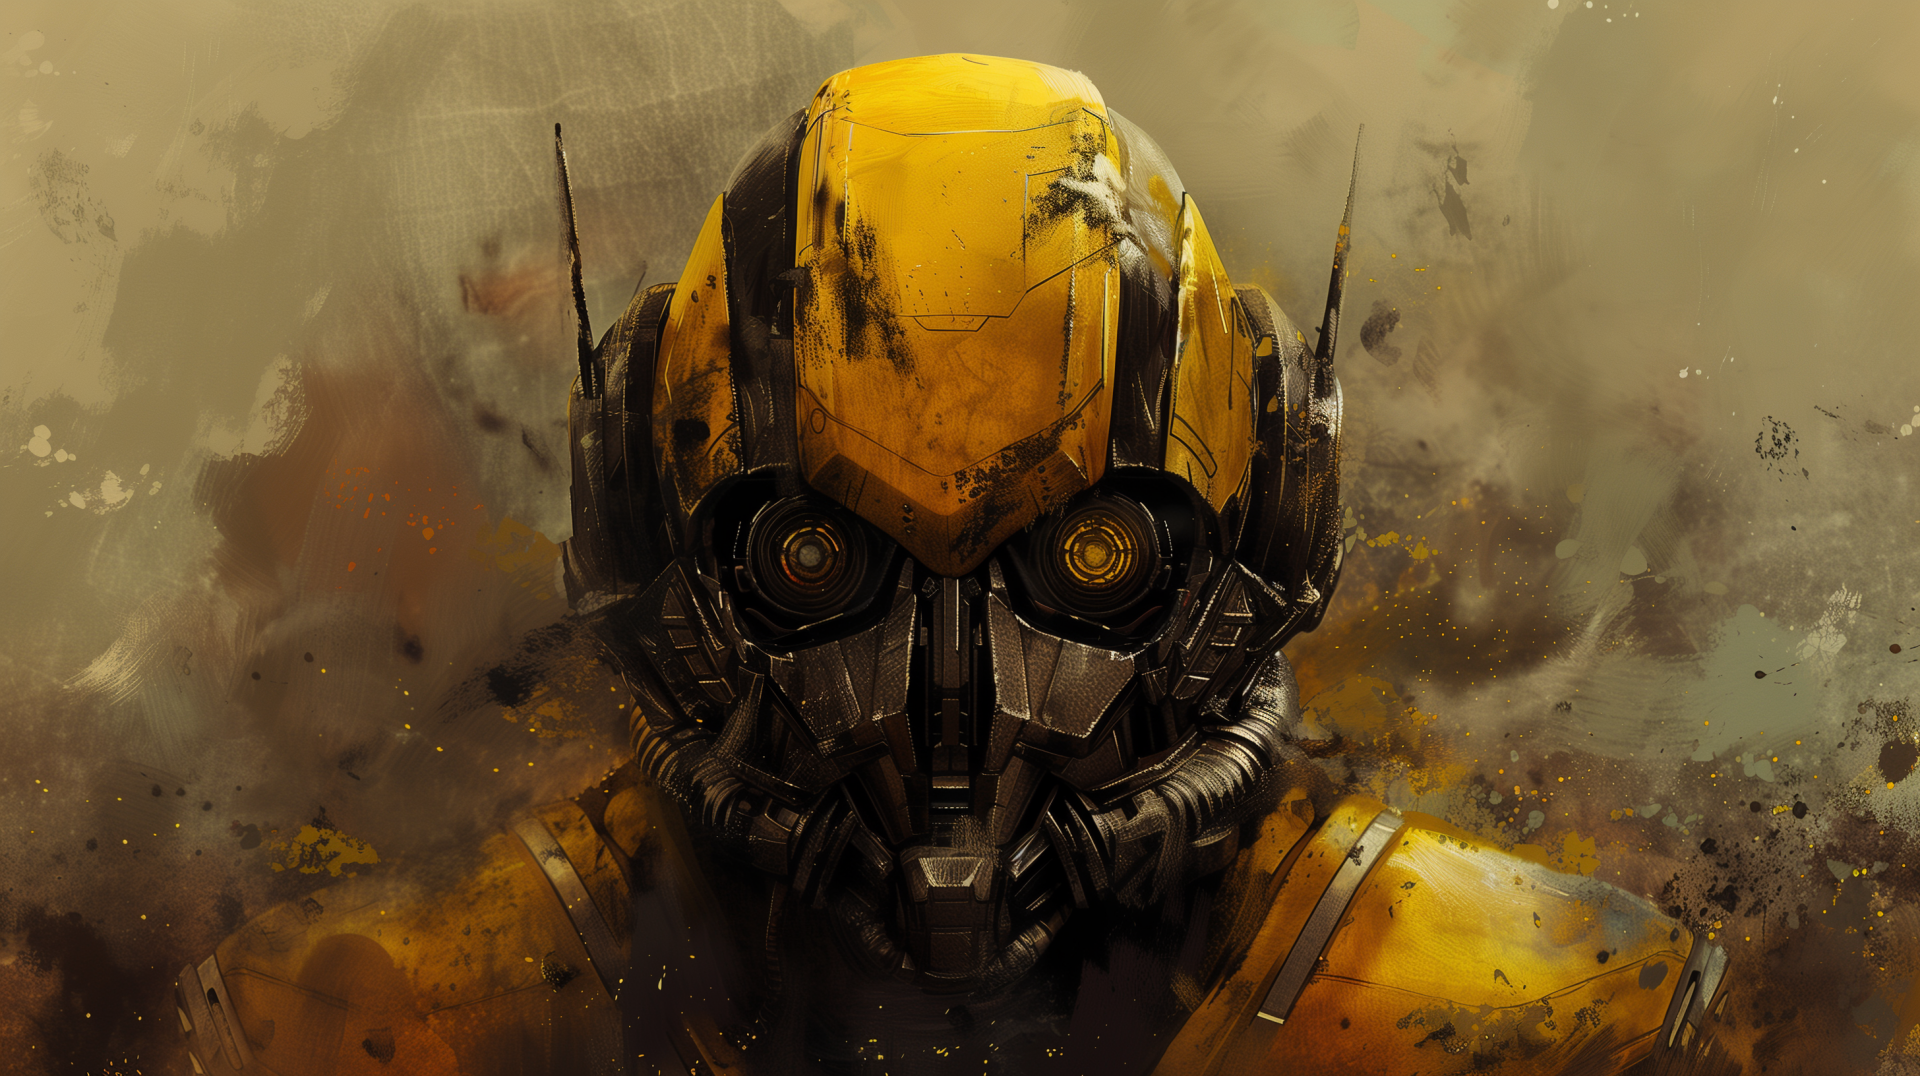 HD wallpaper of Bumblebee's head from the Transformers movie, with a grunge artistic background.